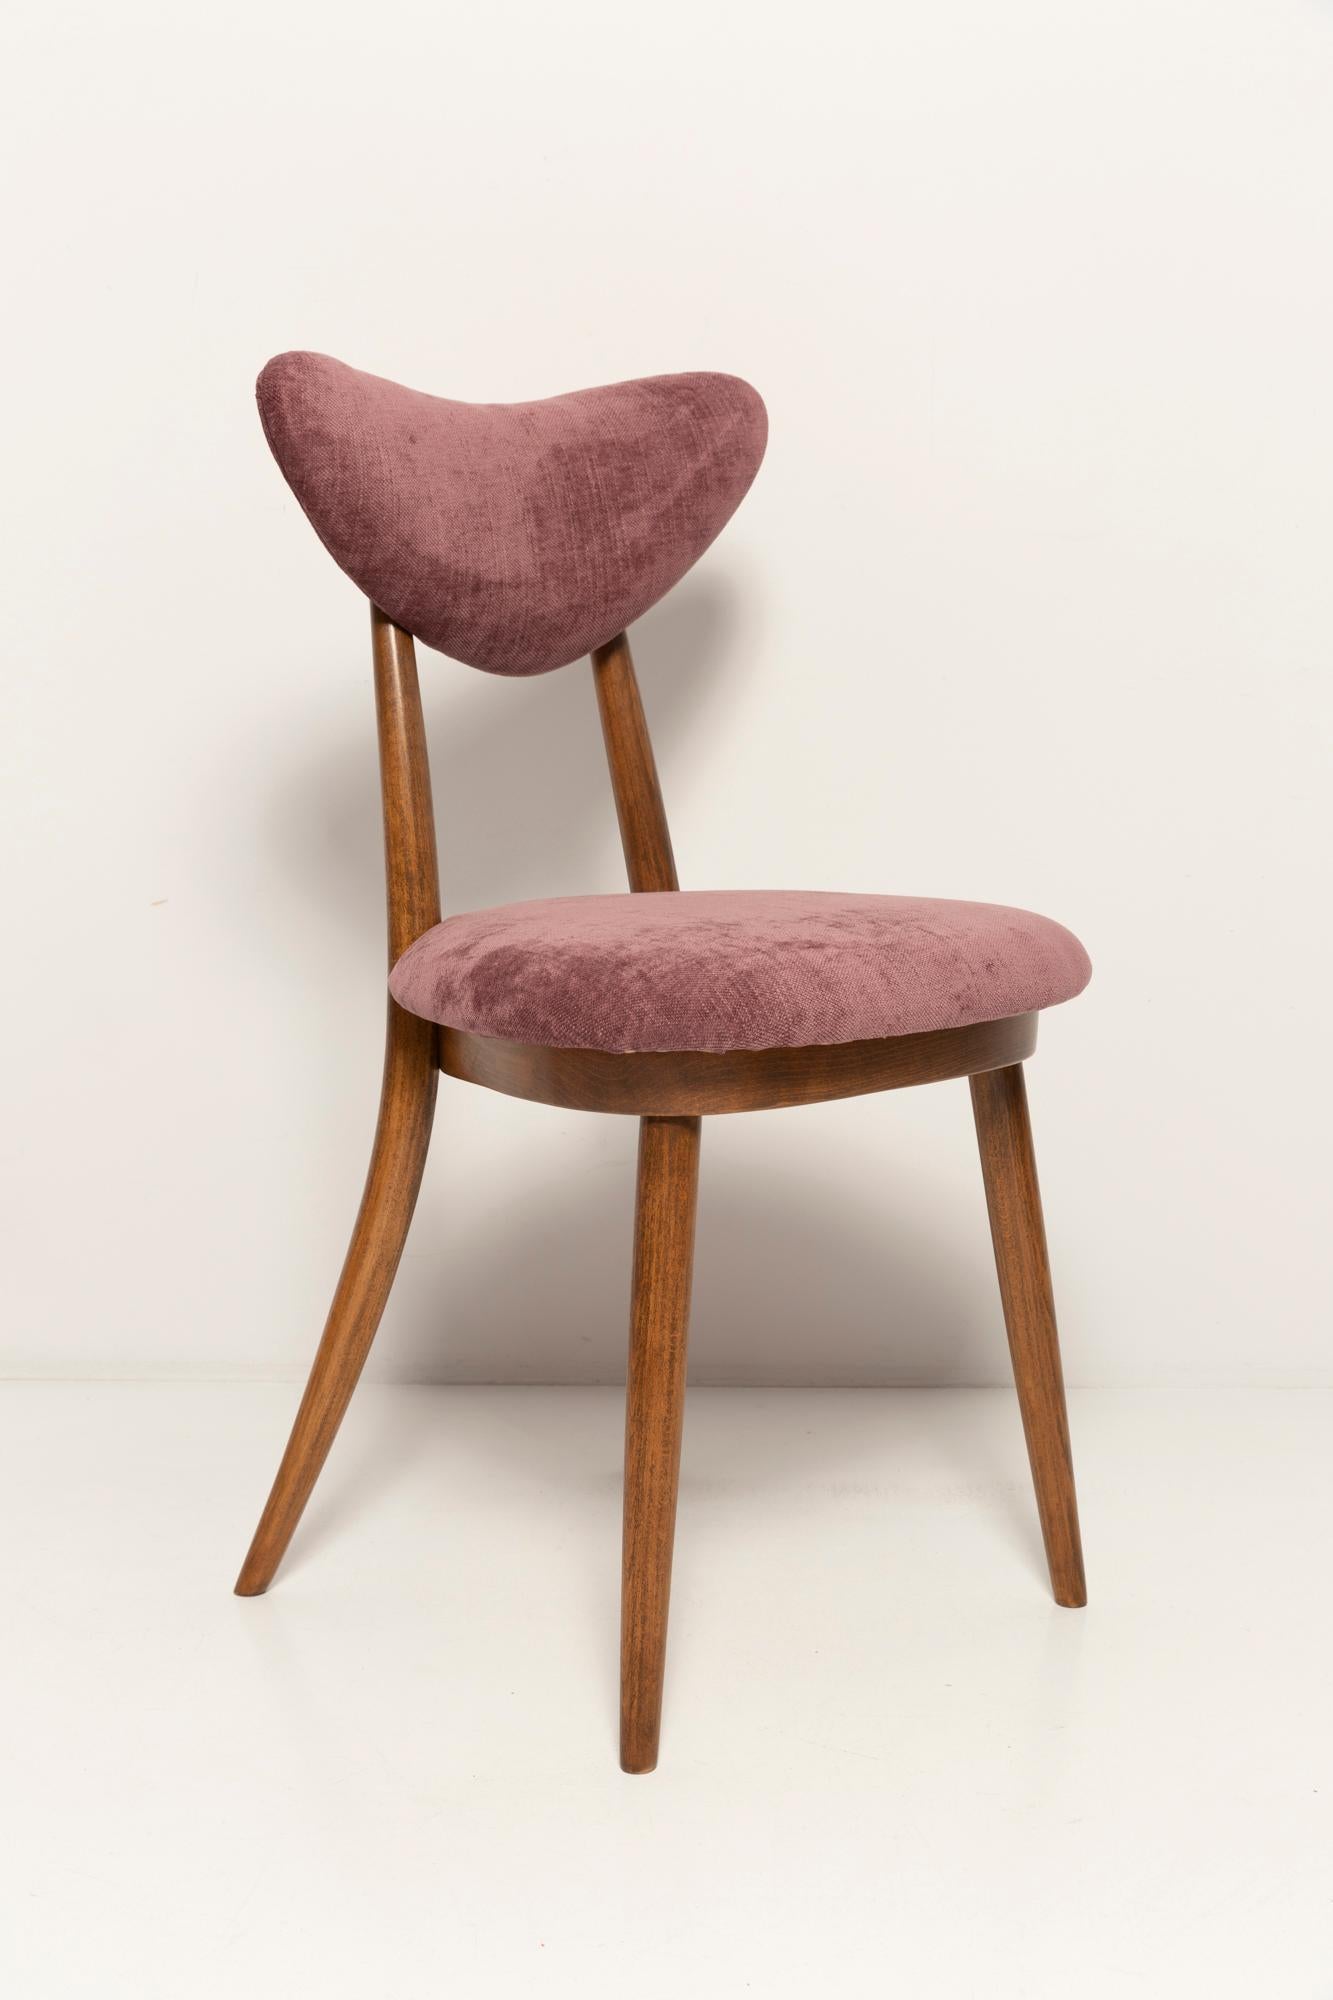 Set of Eight Midcentury Violet Velvet, Walnut Wood Heart Chairs, Europe, 1960 For Sale 1